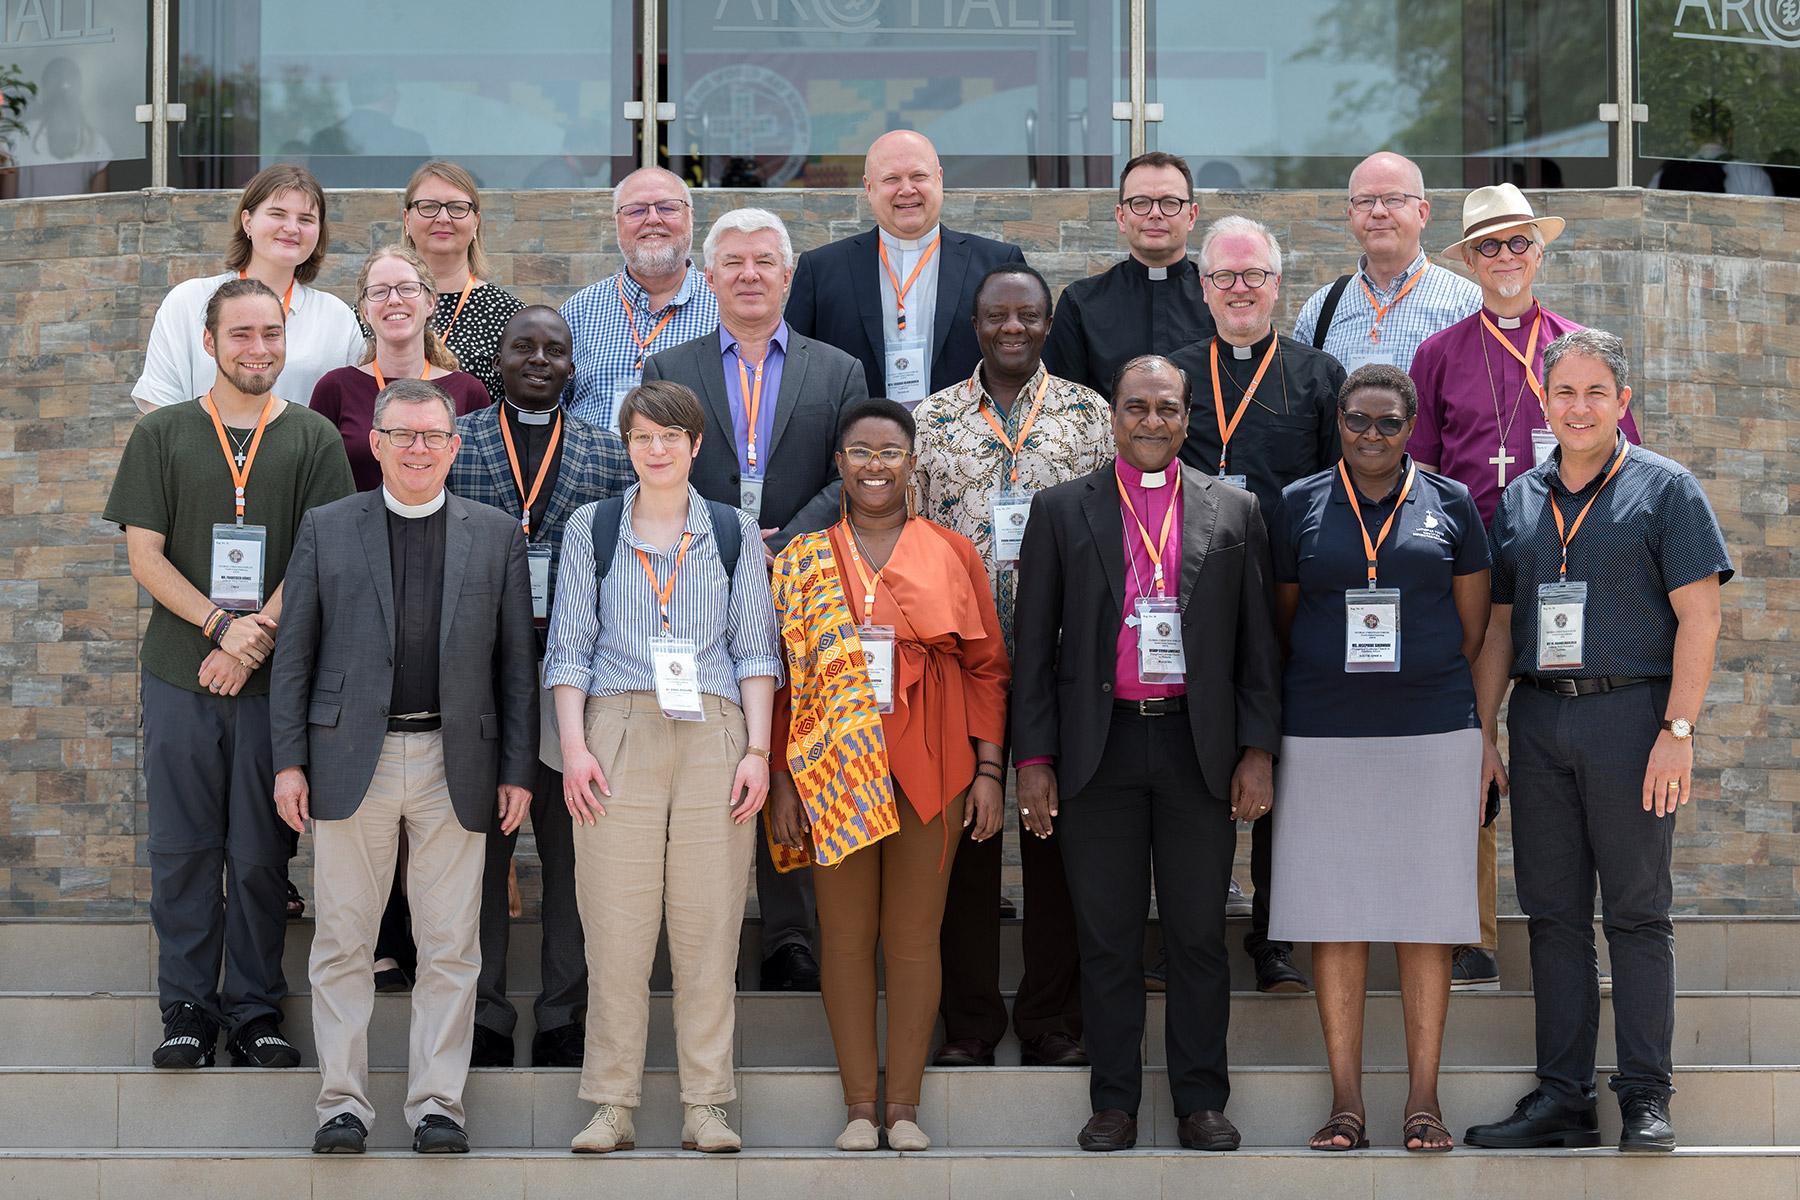 Lutheran participants at the Global Christian Forum gathering in Accra, Ghana. Photo: A. Hillert